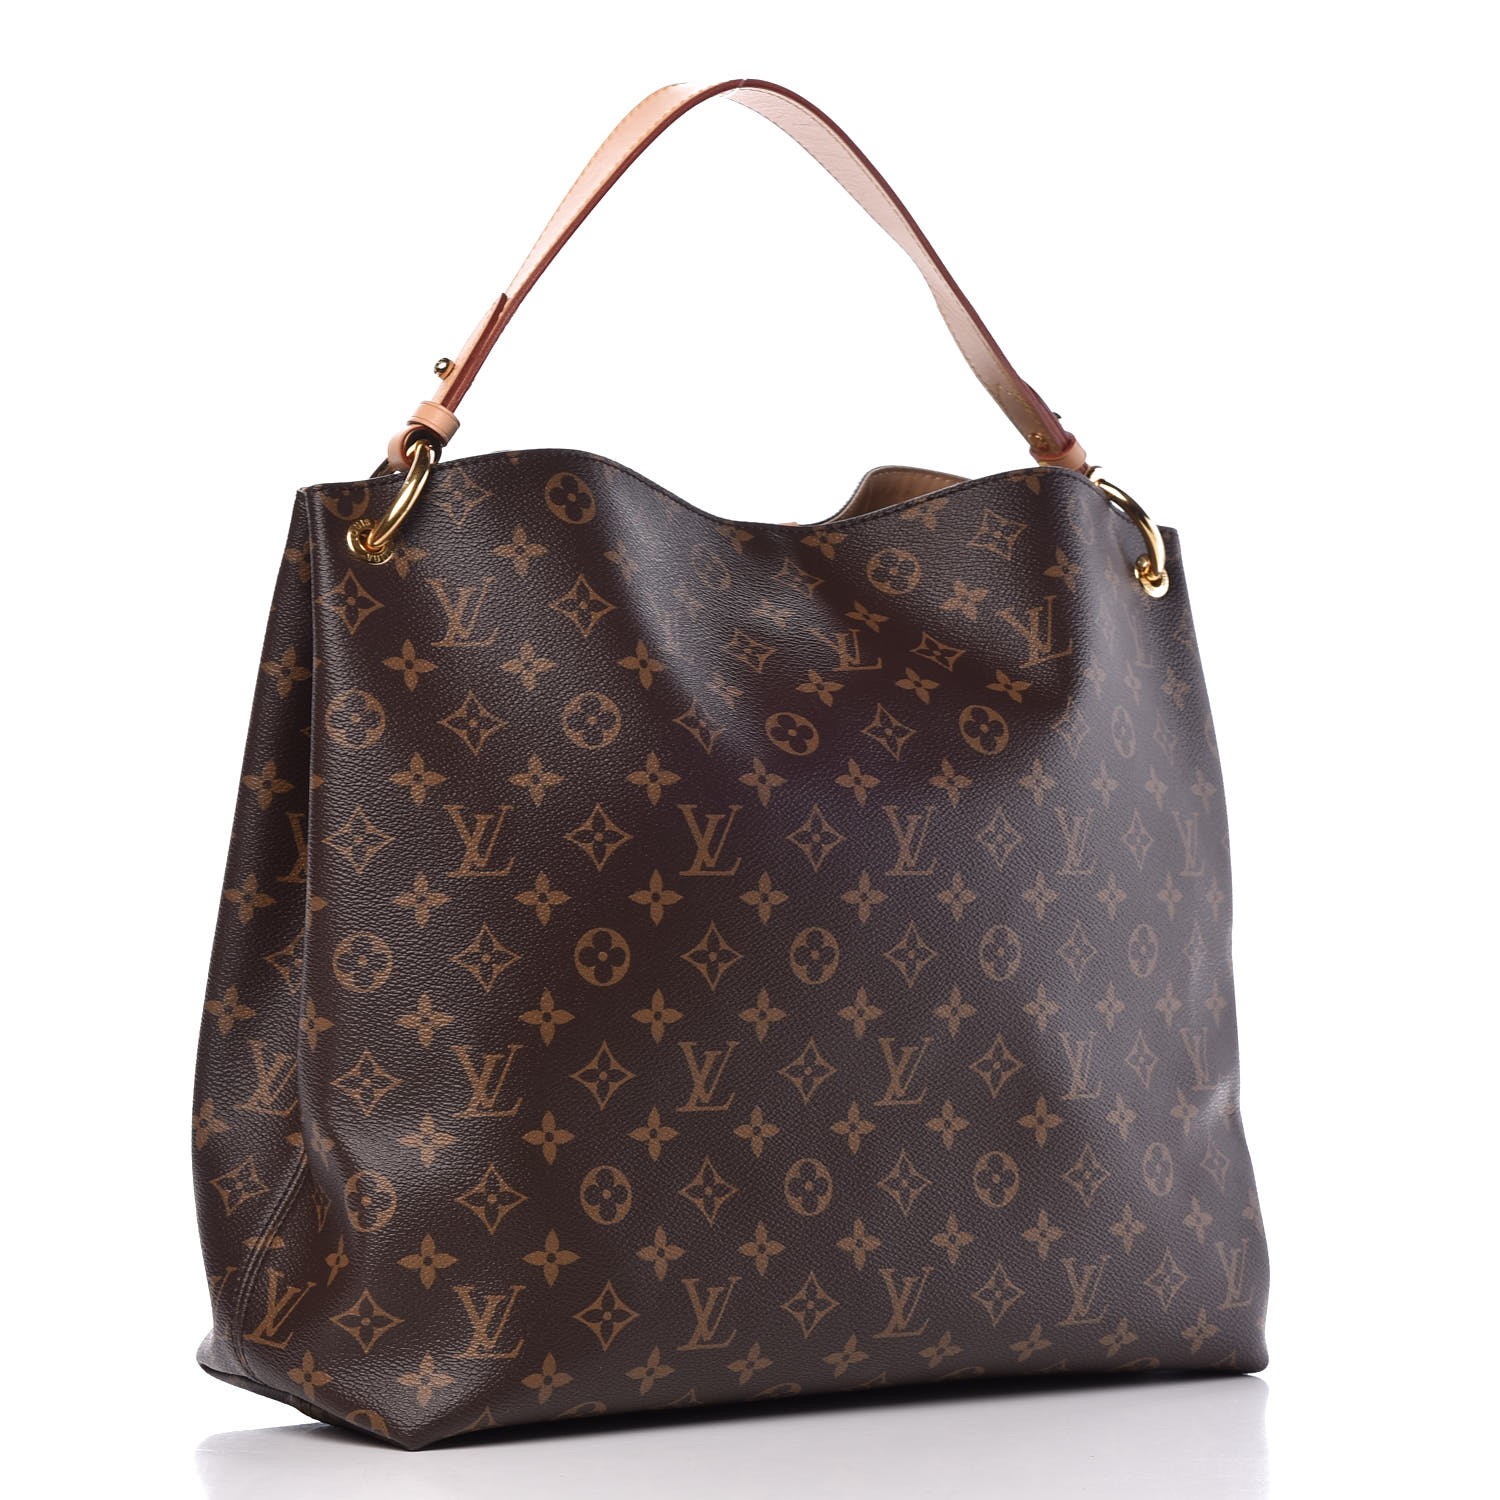 I like the size and shape of the Louis Vuitton Graceful MM but the sho, Totebag